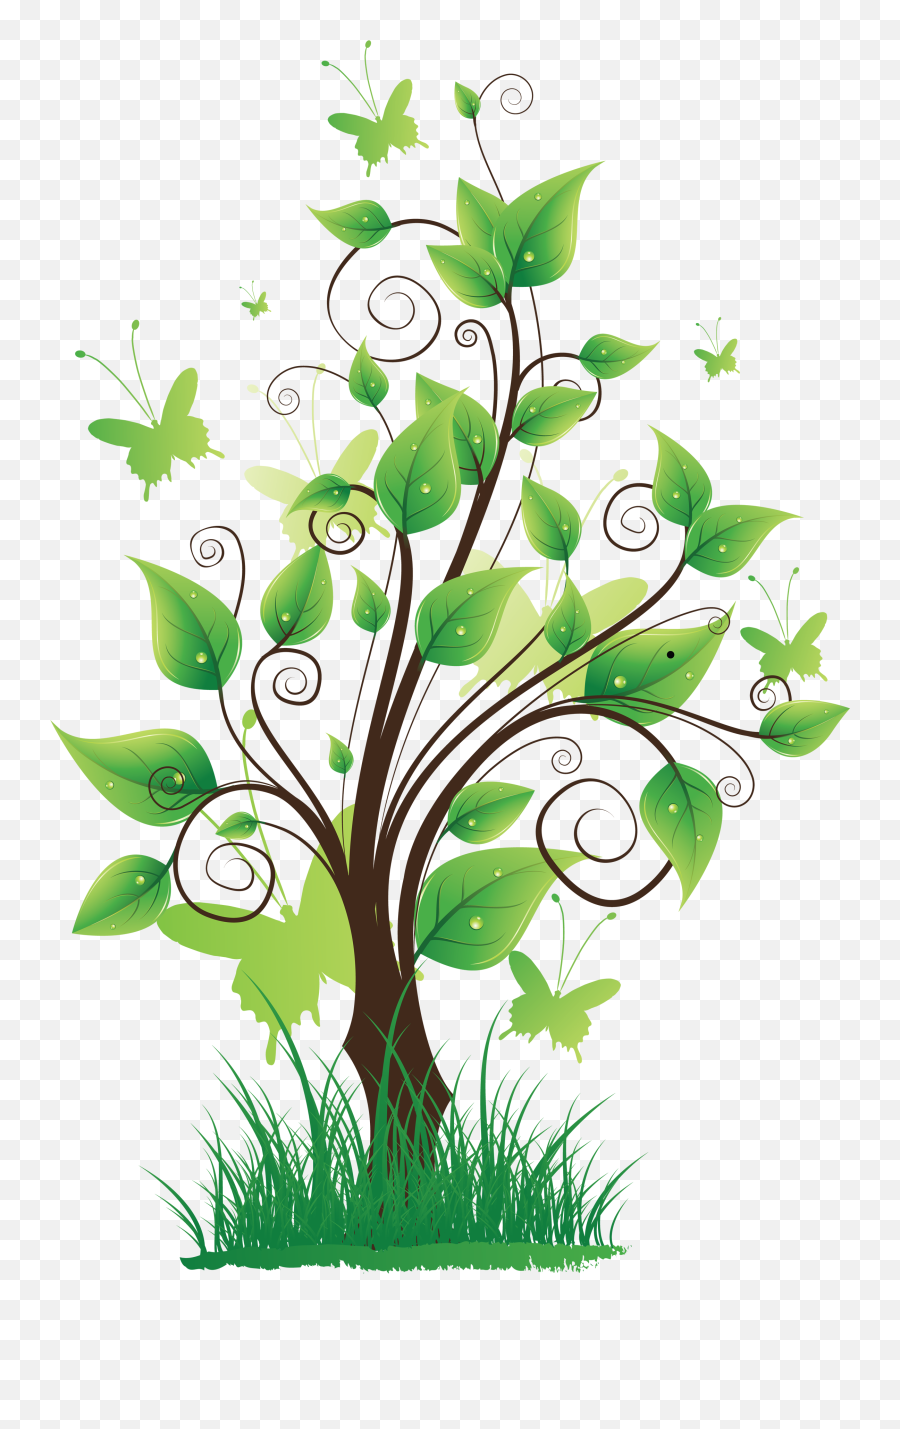 40 Tree Png Images Are Free To Download - Nature Tree Background Design,Nature Png